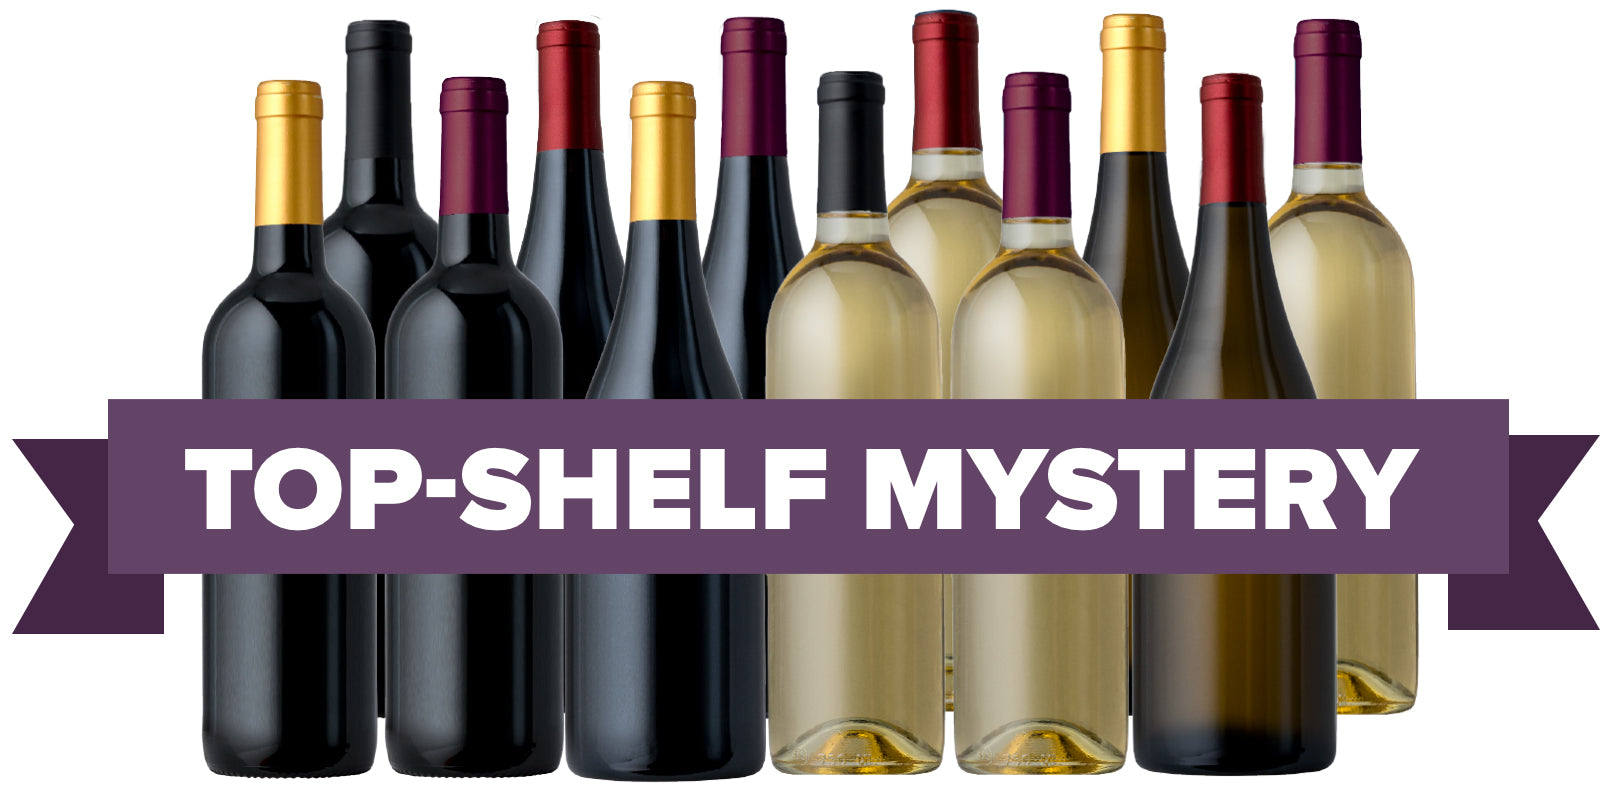 The Spooktacular Mystery Top-Shelf 12-Pack 2022